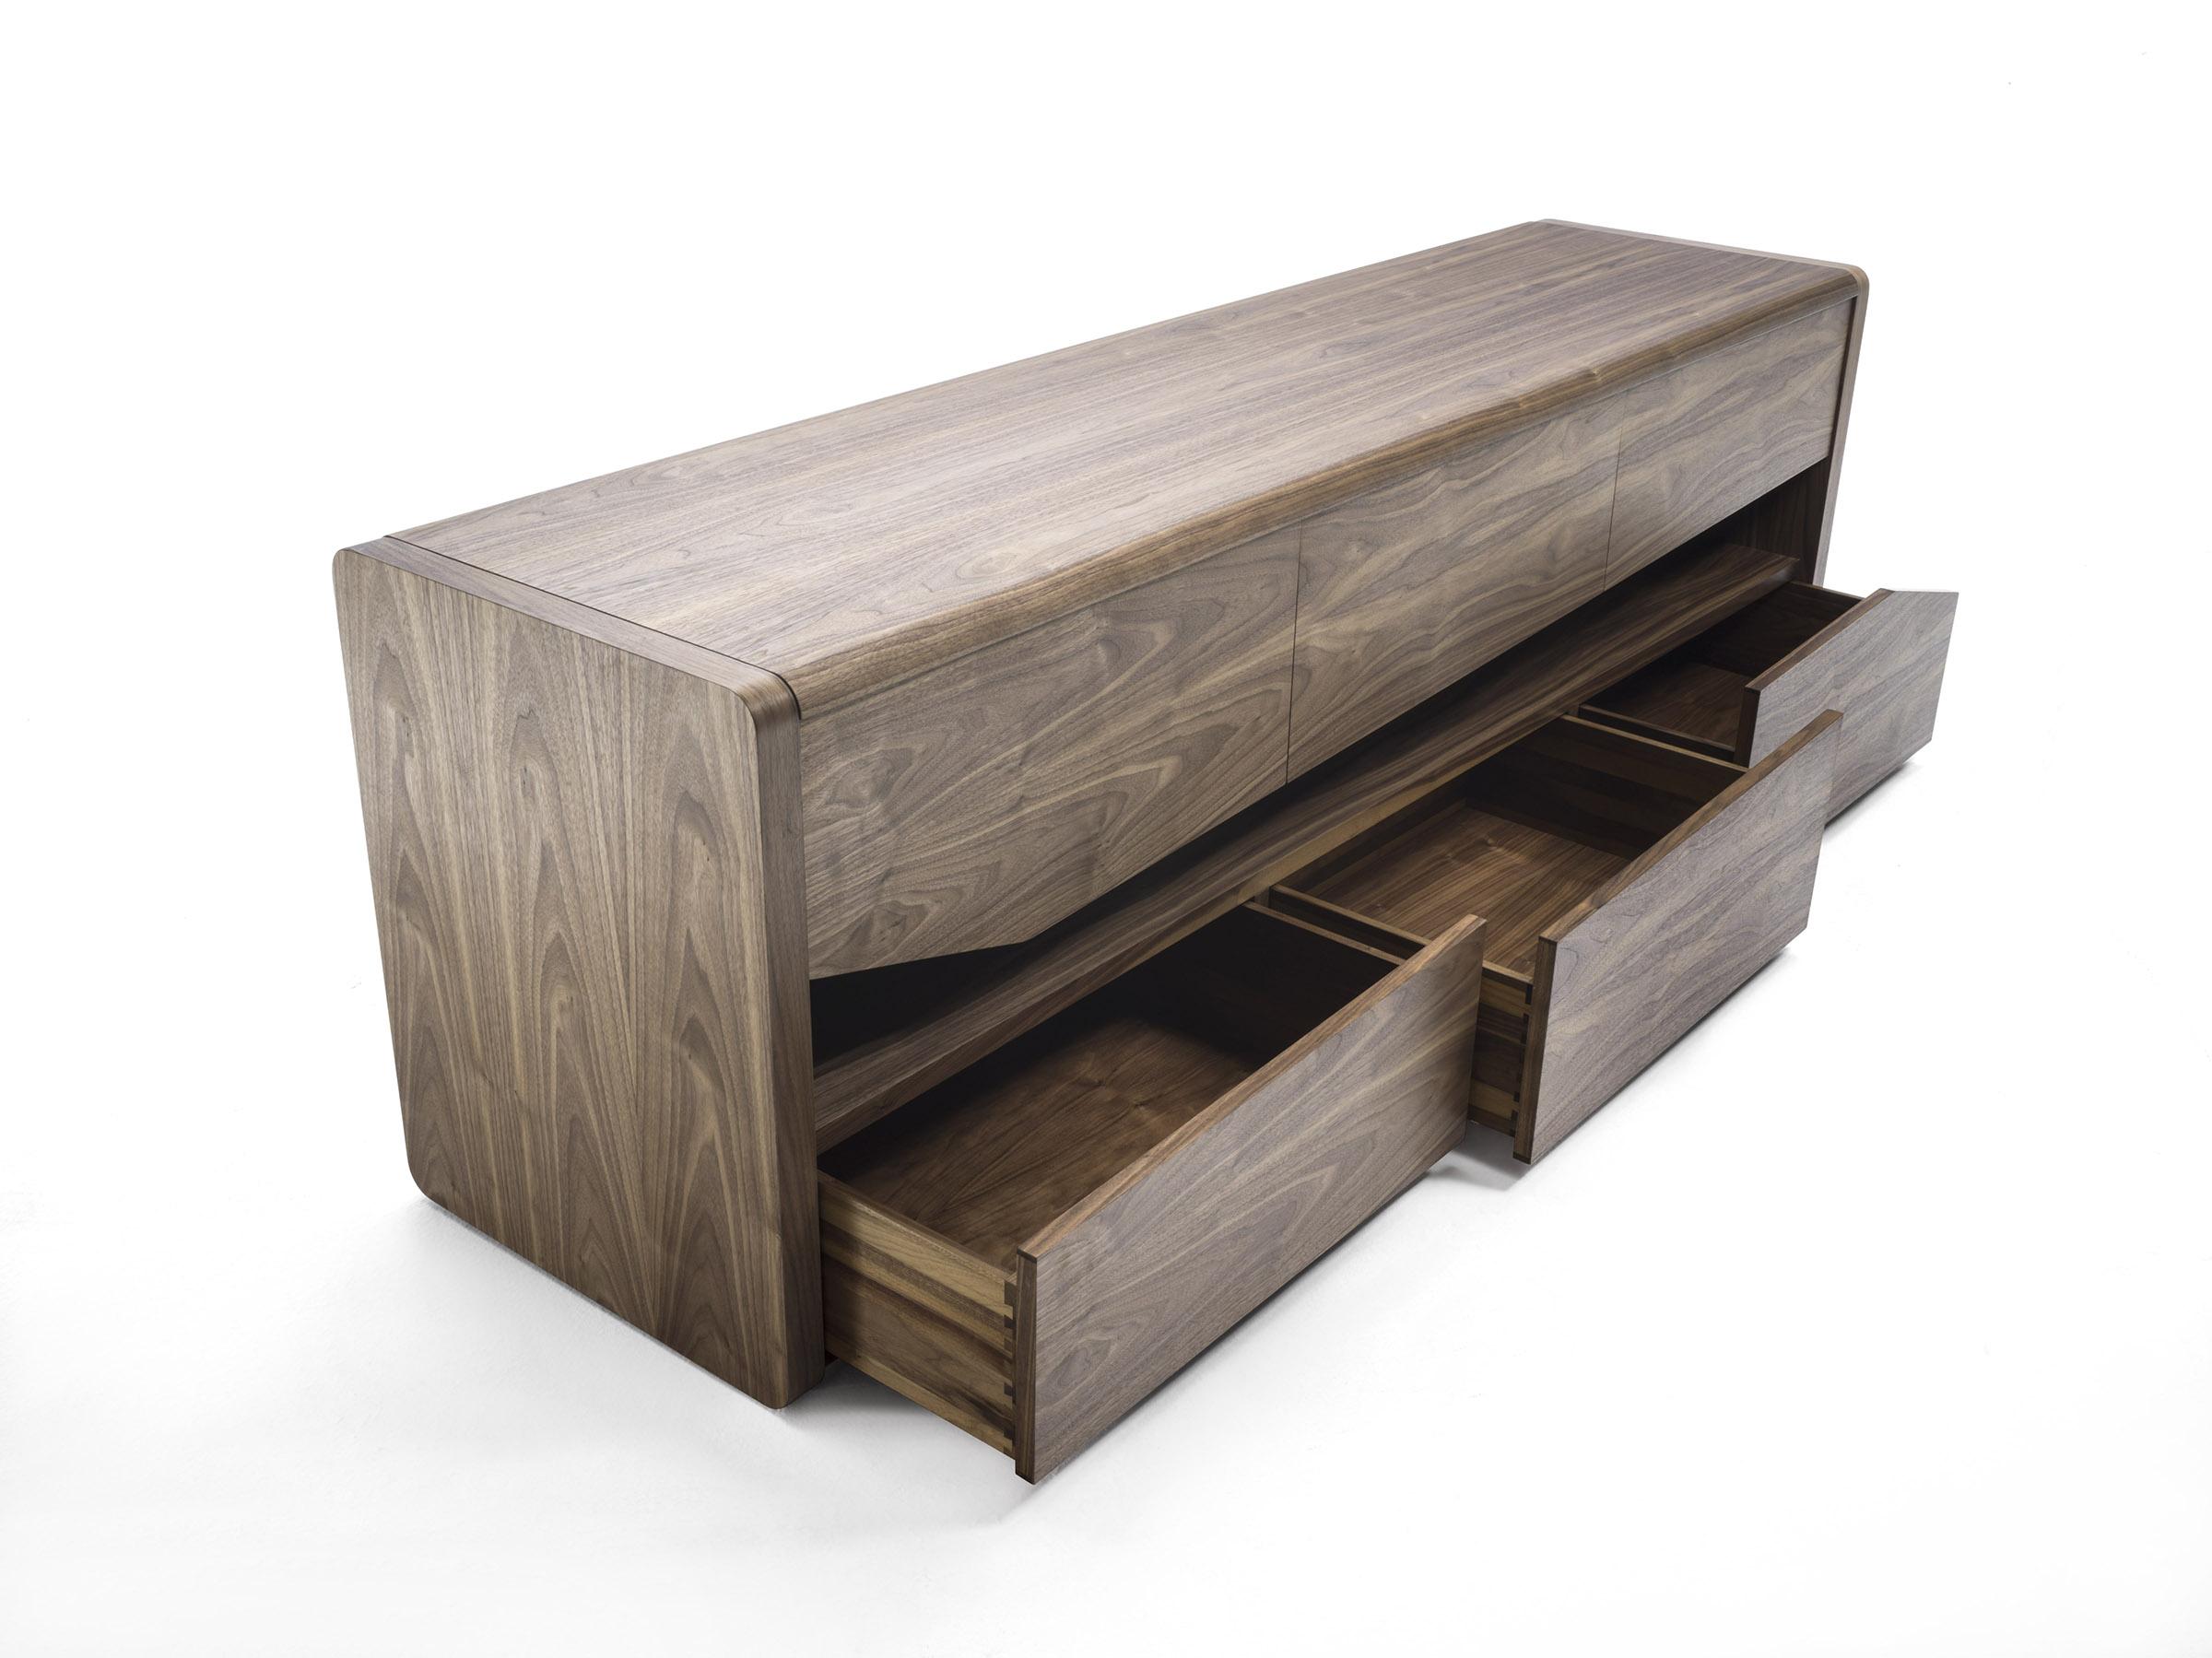 Sideboard in solid and multilayer wood, characterized by rounded sides and top that surround the 6 drawers, assembled with dovetail joints and equipped with shaped fronts. A central open space divides the two rows of drawers.

Available in walnut